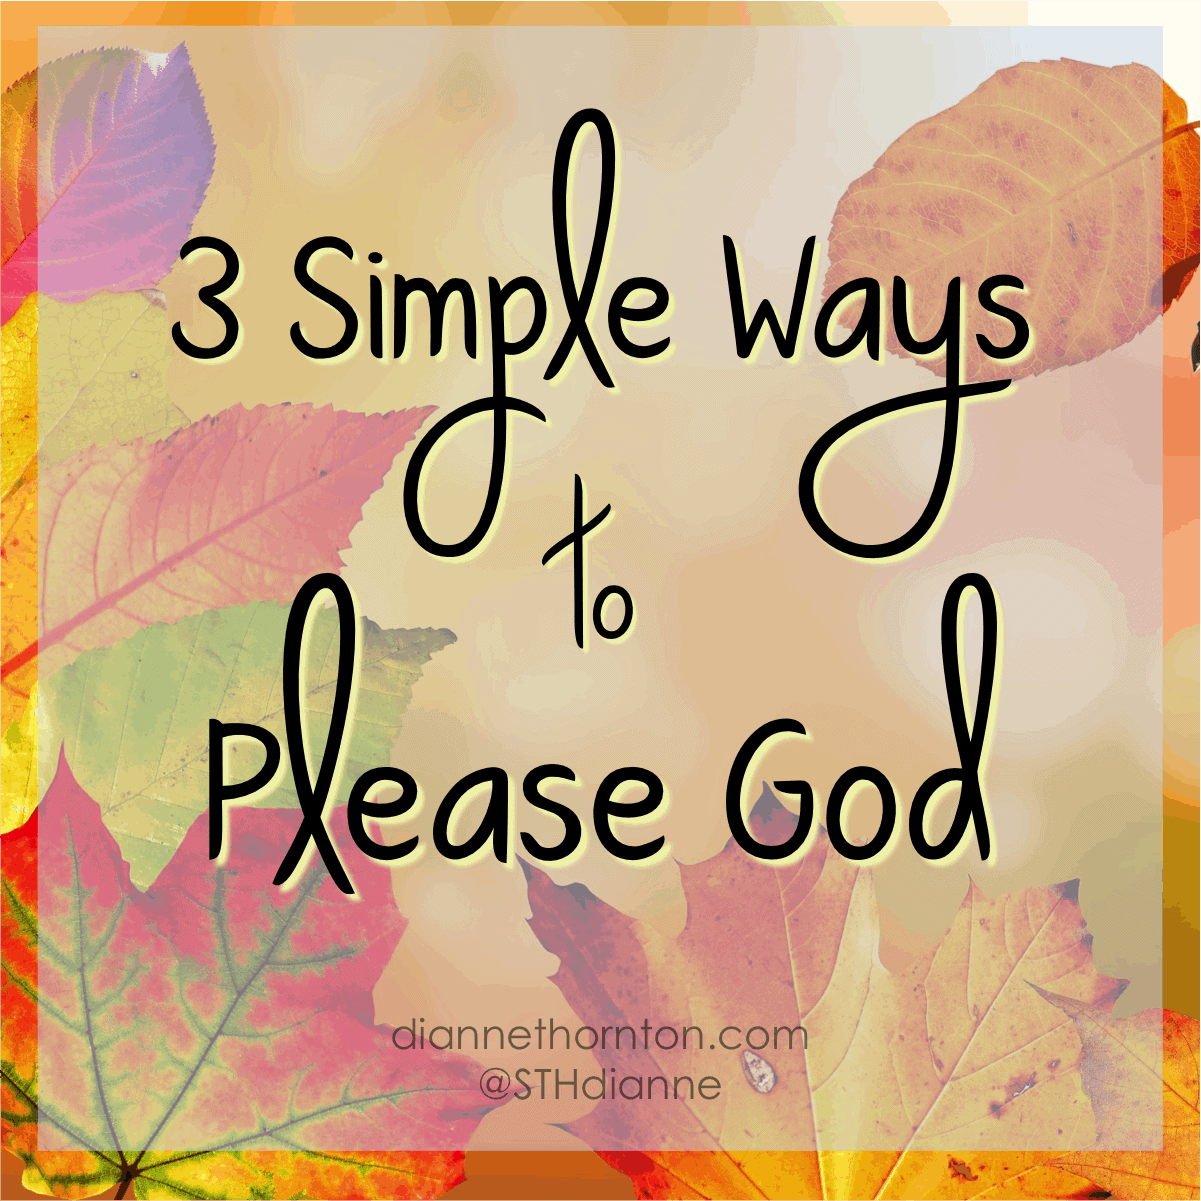 Are you looking to reestablish your relationship with God? He isn't looking a showy display of faith. There are 3 simple ways to please God.